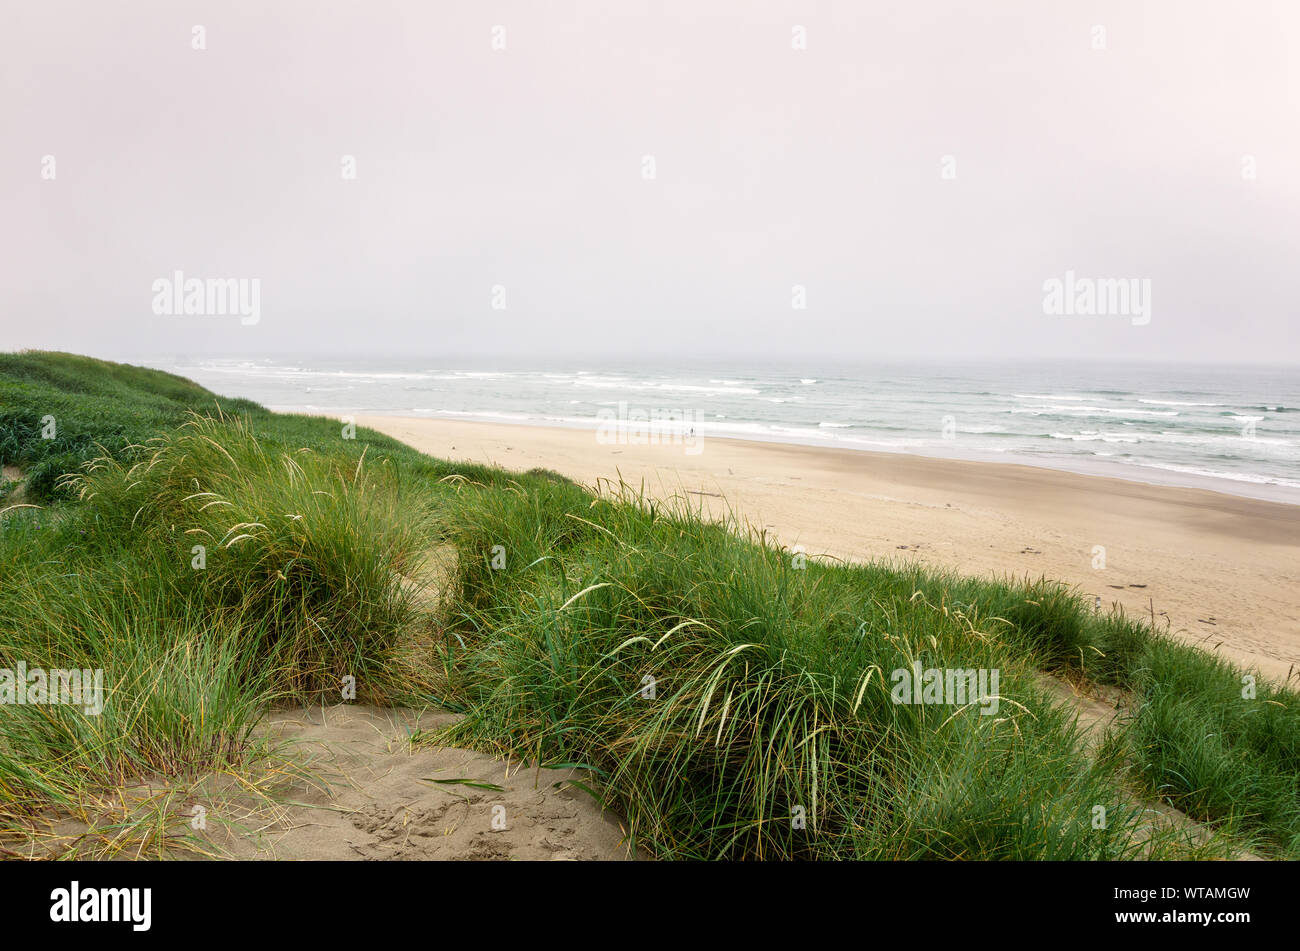 Beach and sand dunes along the coast of Oregon on a foggy summer day. People walking along the shore are visible in distance. Stock Photo